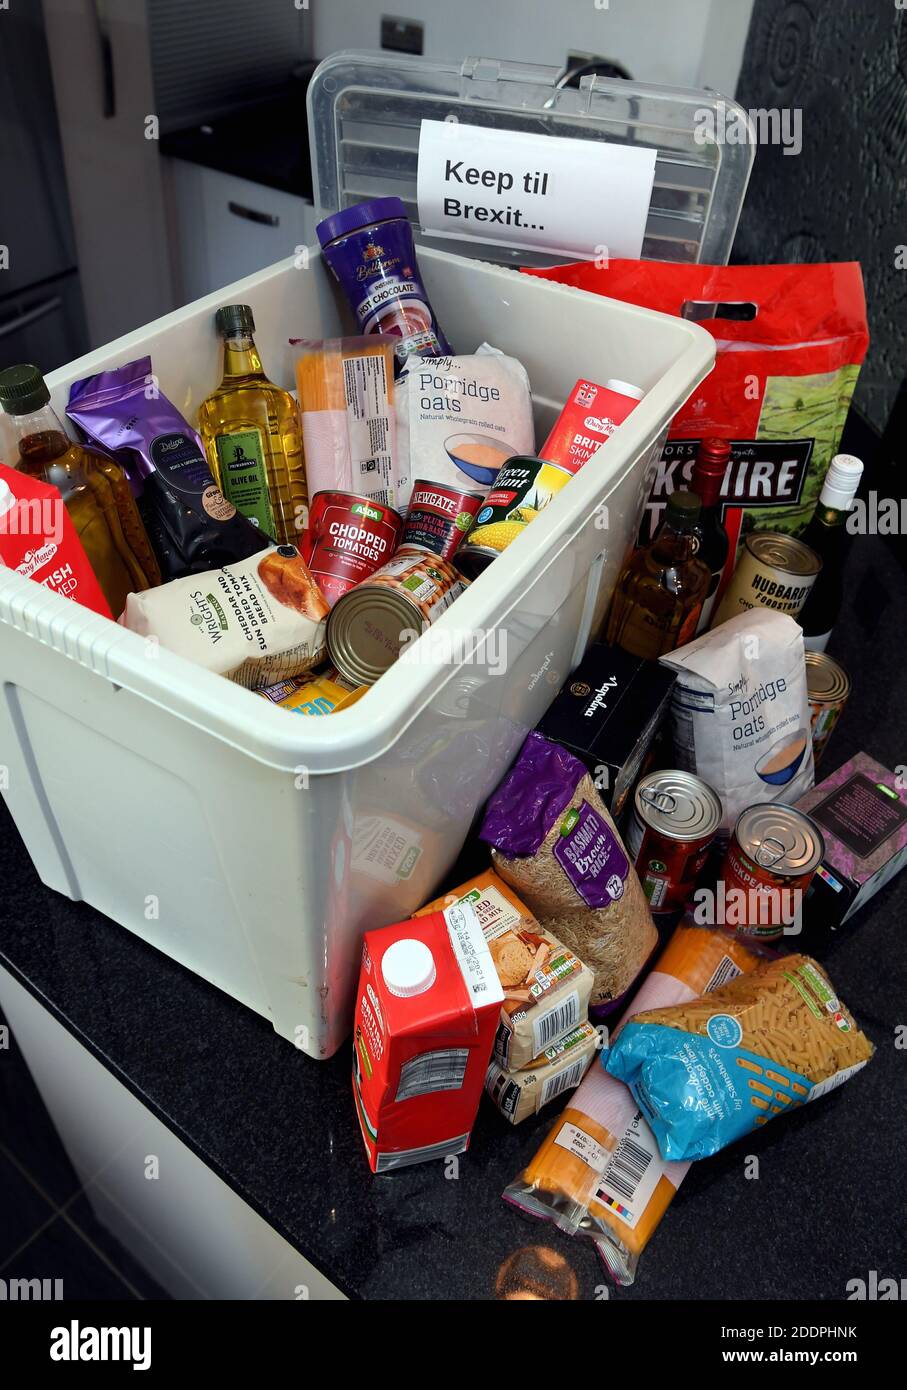 Cardiff Wales UK  26 November 2020 Brexit food stock, UK households stockpiling food in advance of Brexit, fears of shortages of basic food items has Stock Photo